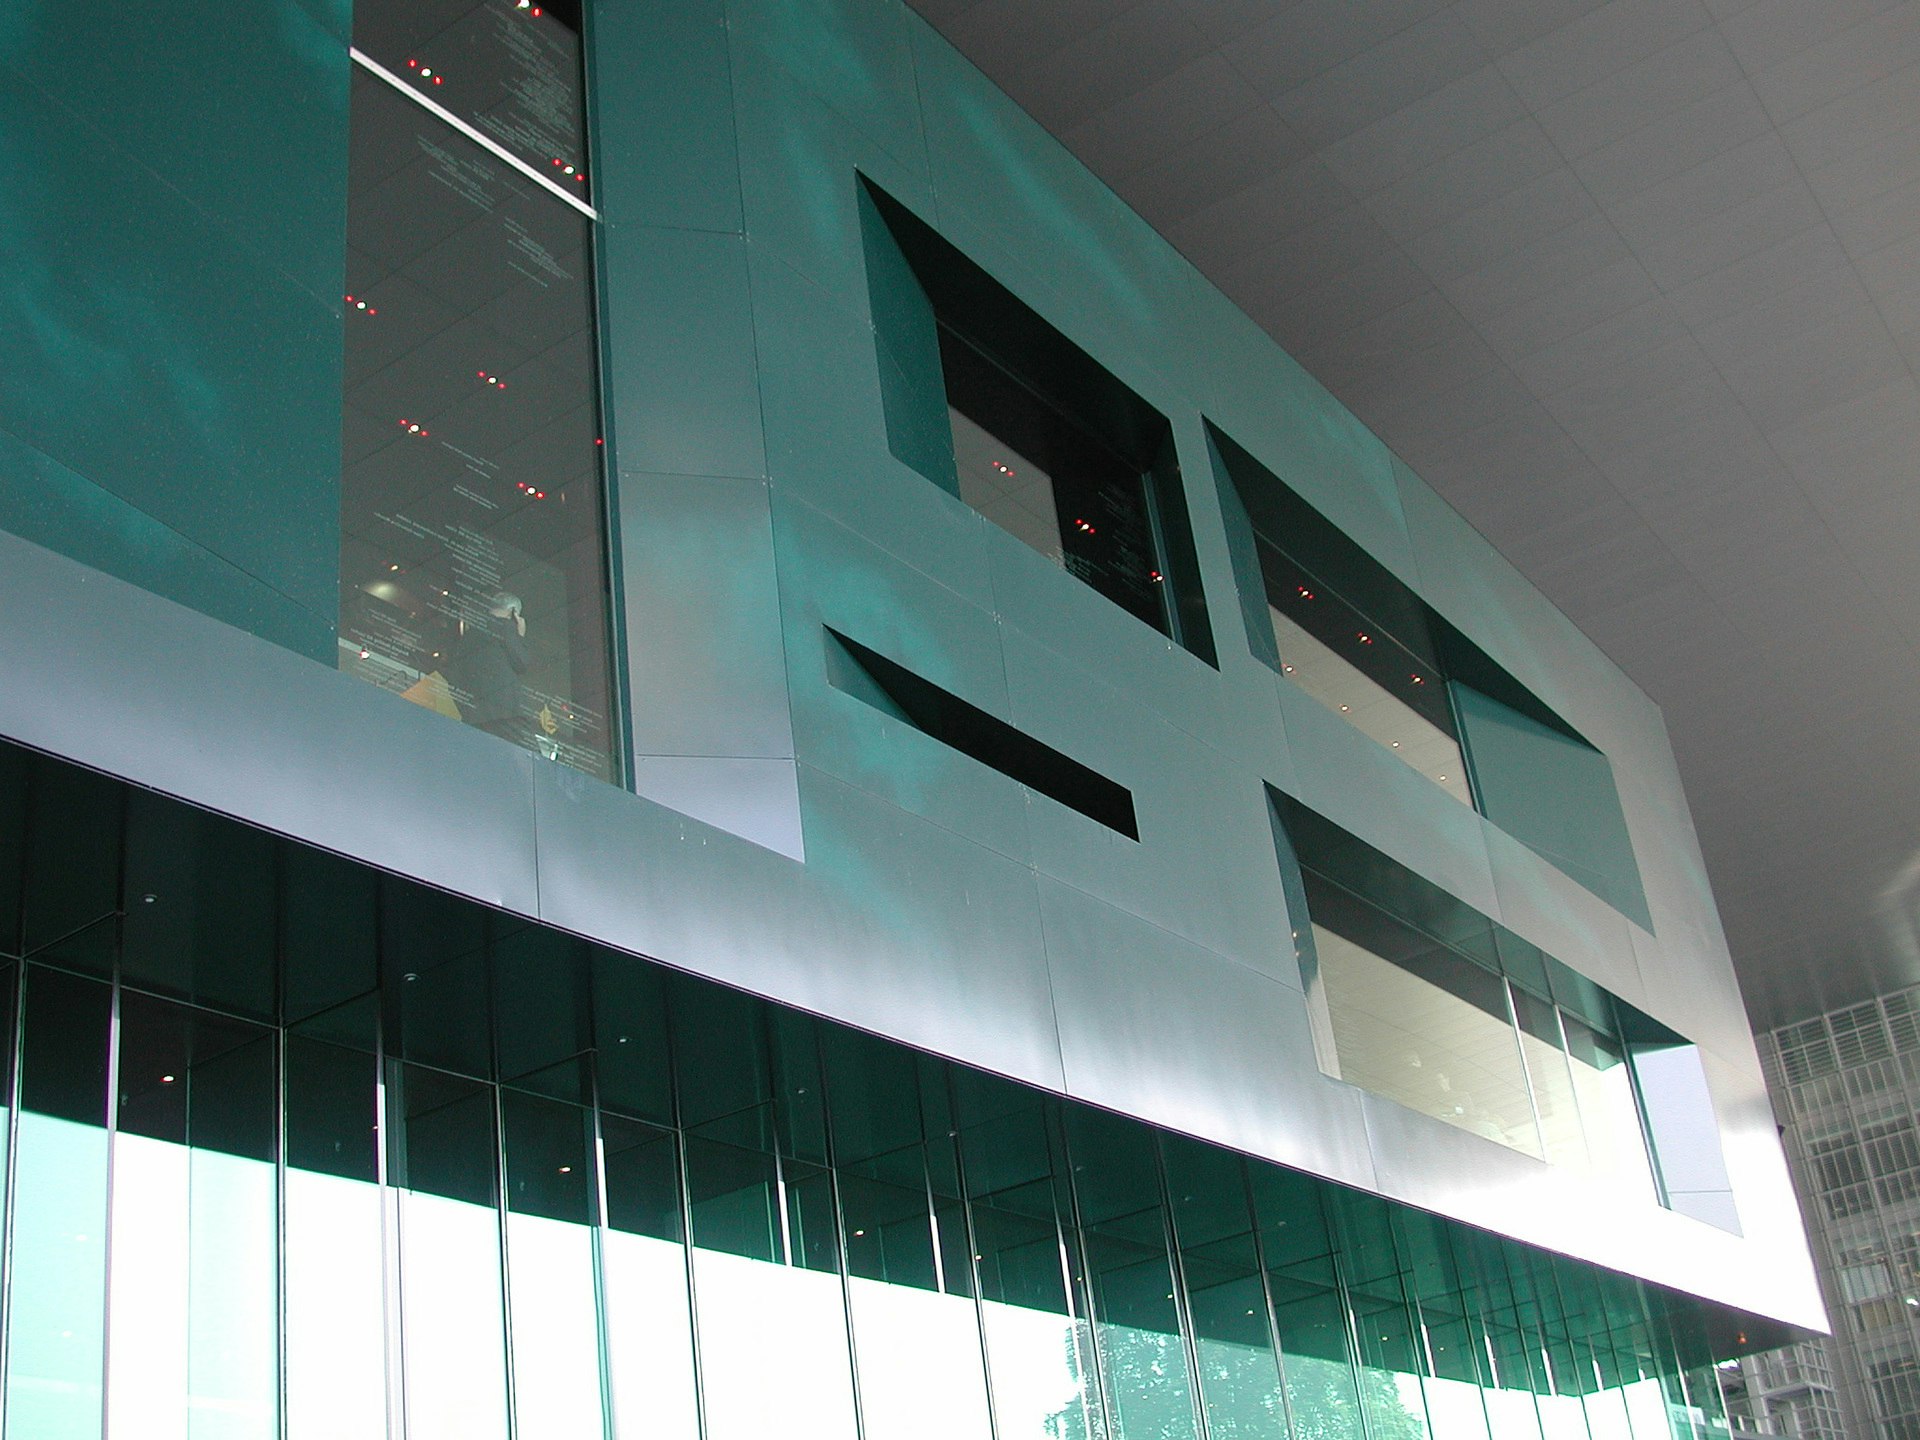 Depending on the lighting, the Concert Hall Wing exhibits a green color and reflects the Water of Lake Lucerne.